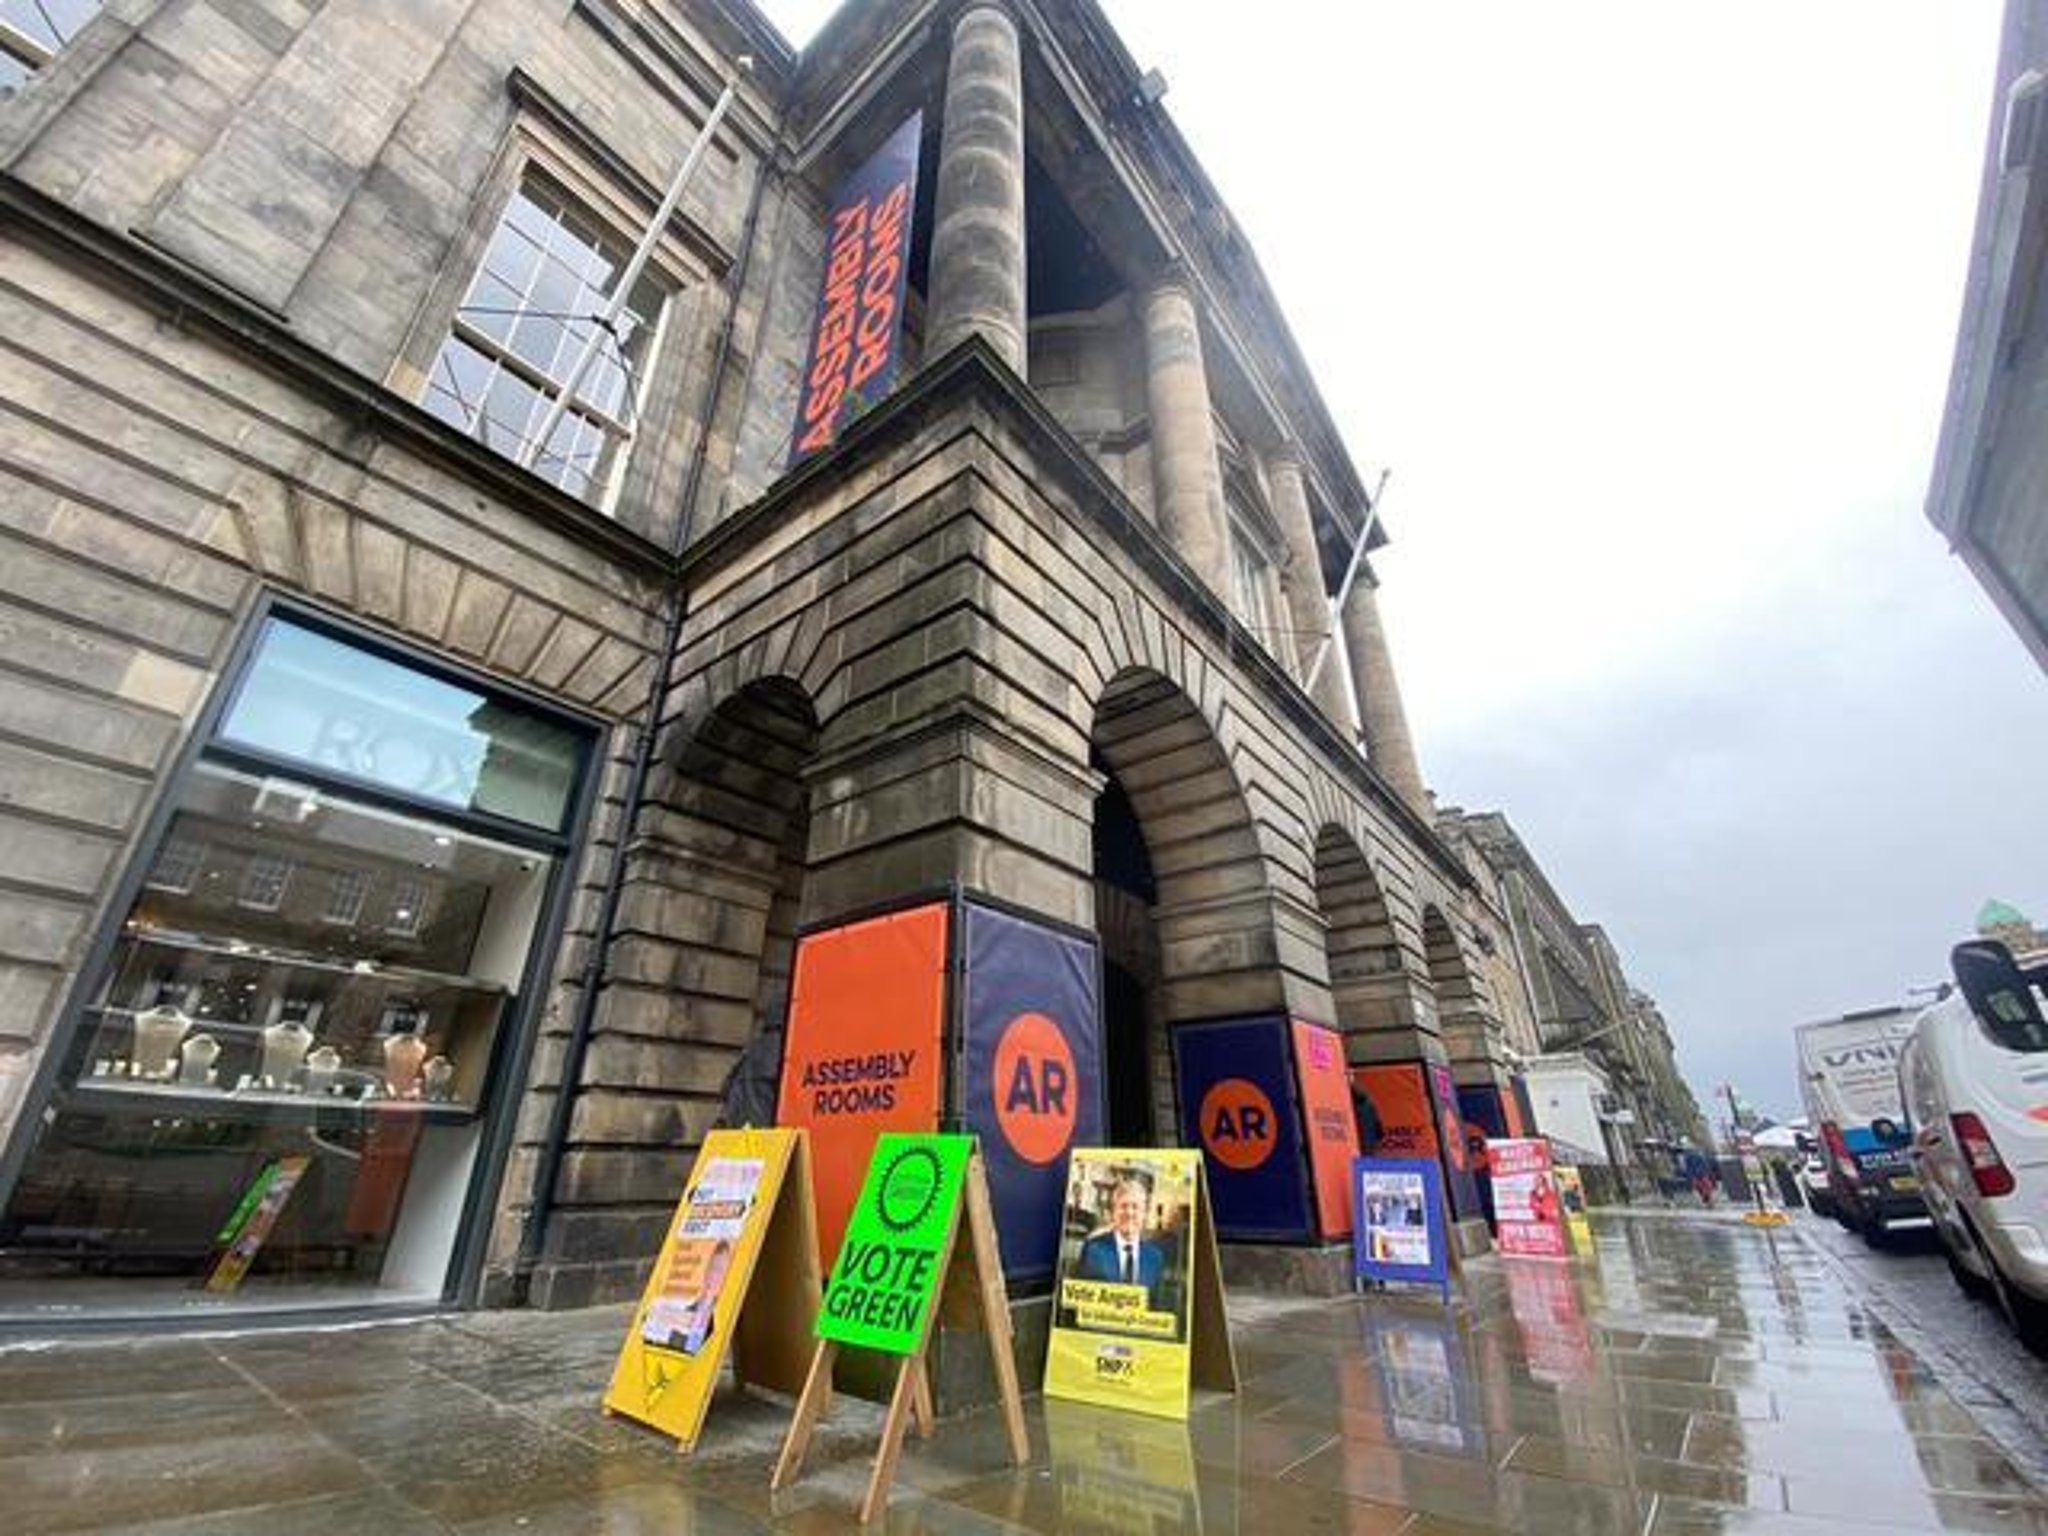 Voters across Edinburgh faced chilly conditions, torrential rain and even hailstones as they turned out at the polls